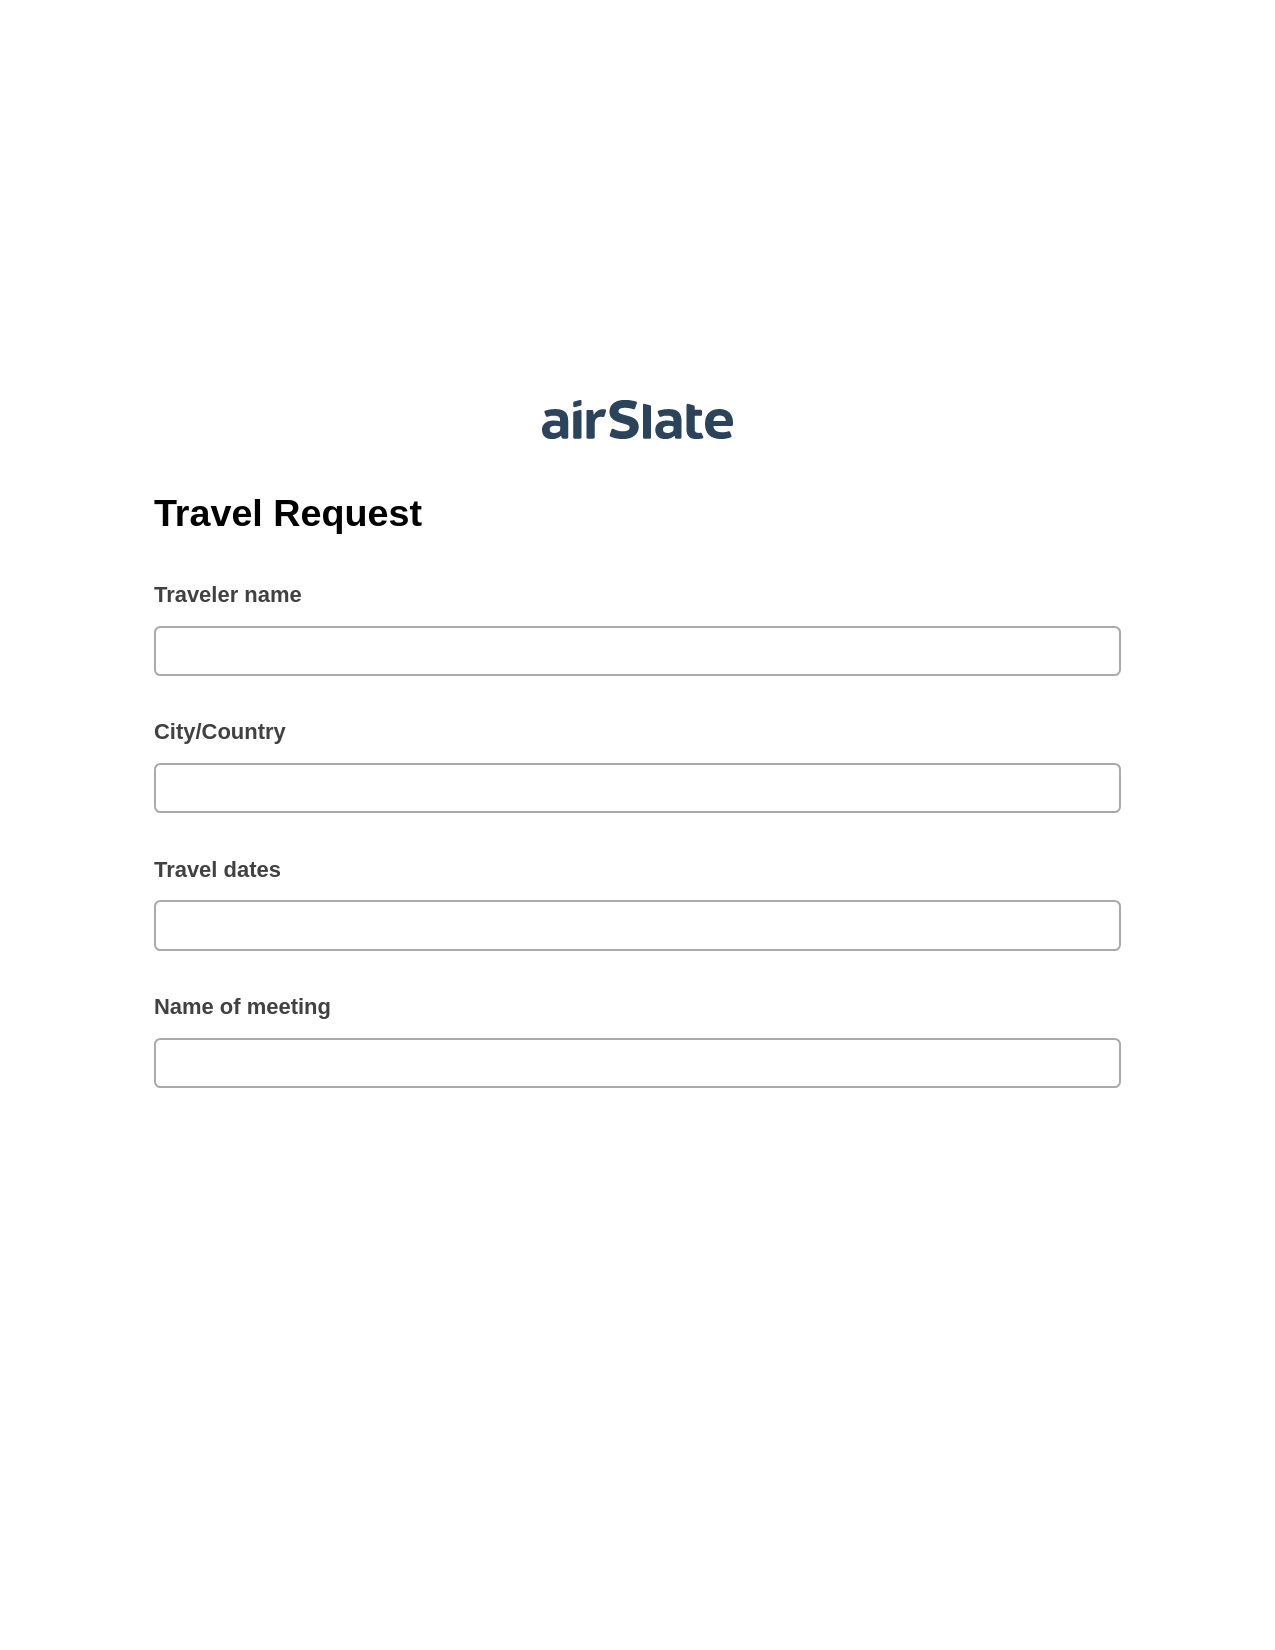 Travel Request Pre-fill from another Slate Bot, Create NetSuite Records Bot, Export to Smartsheet